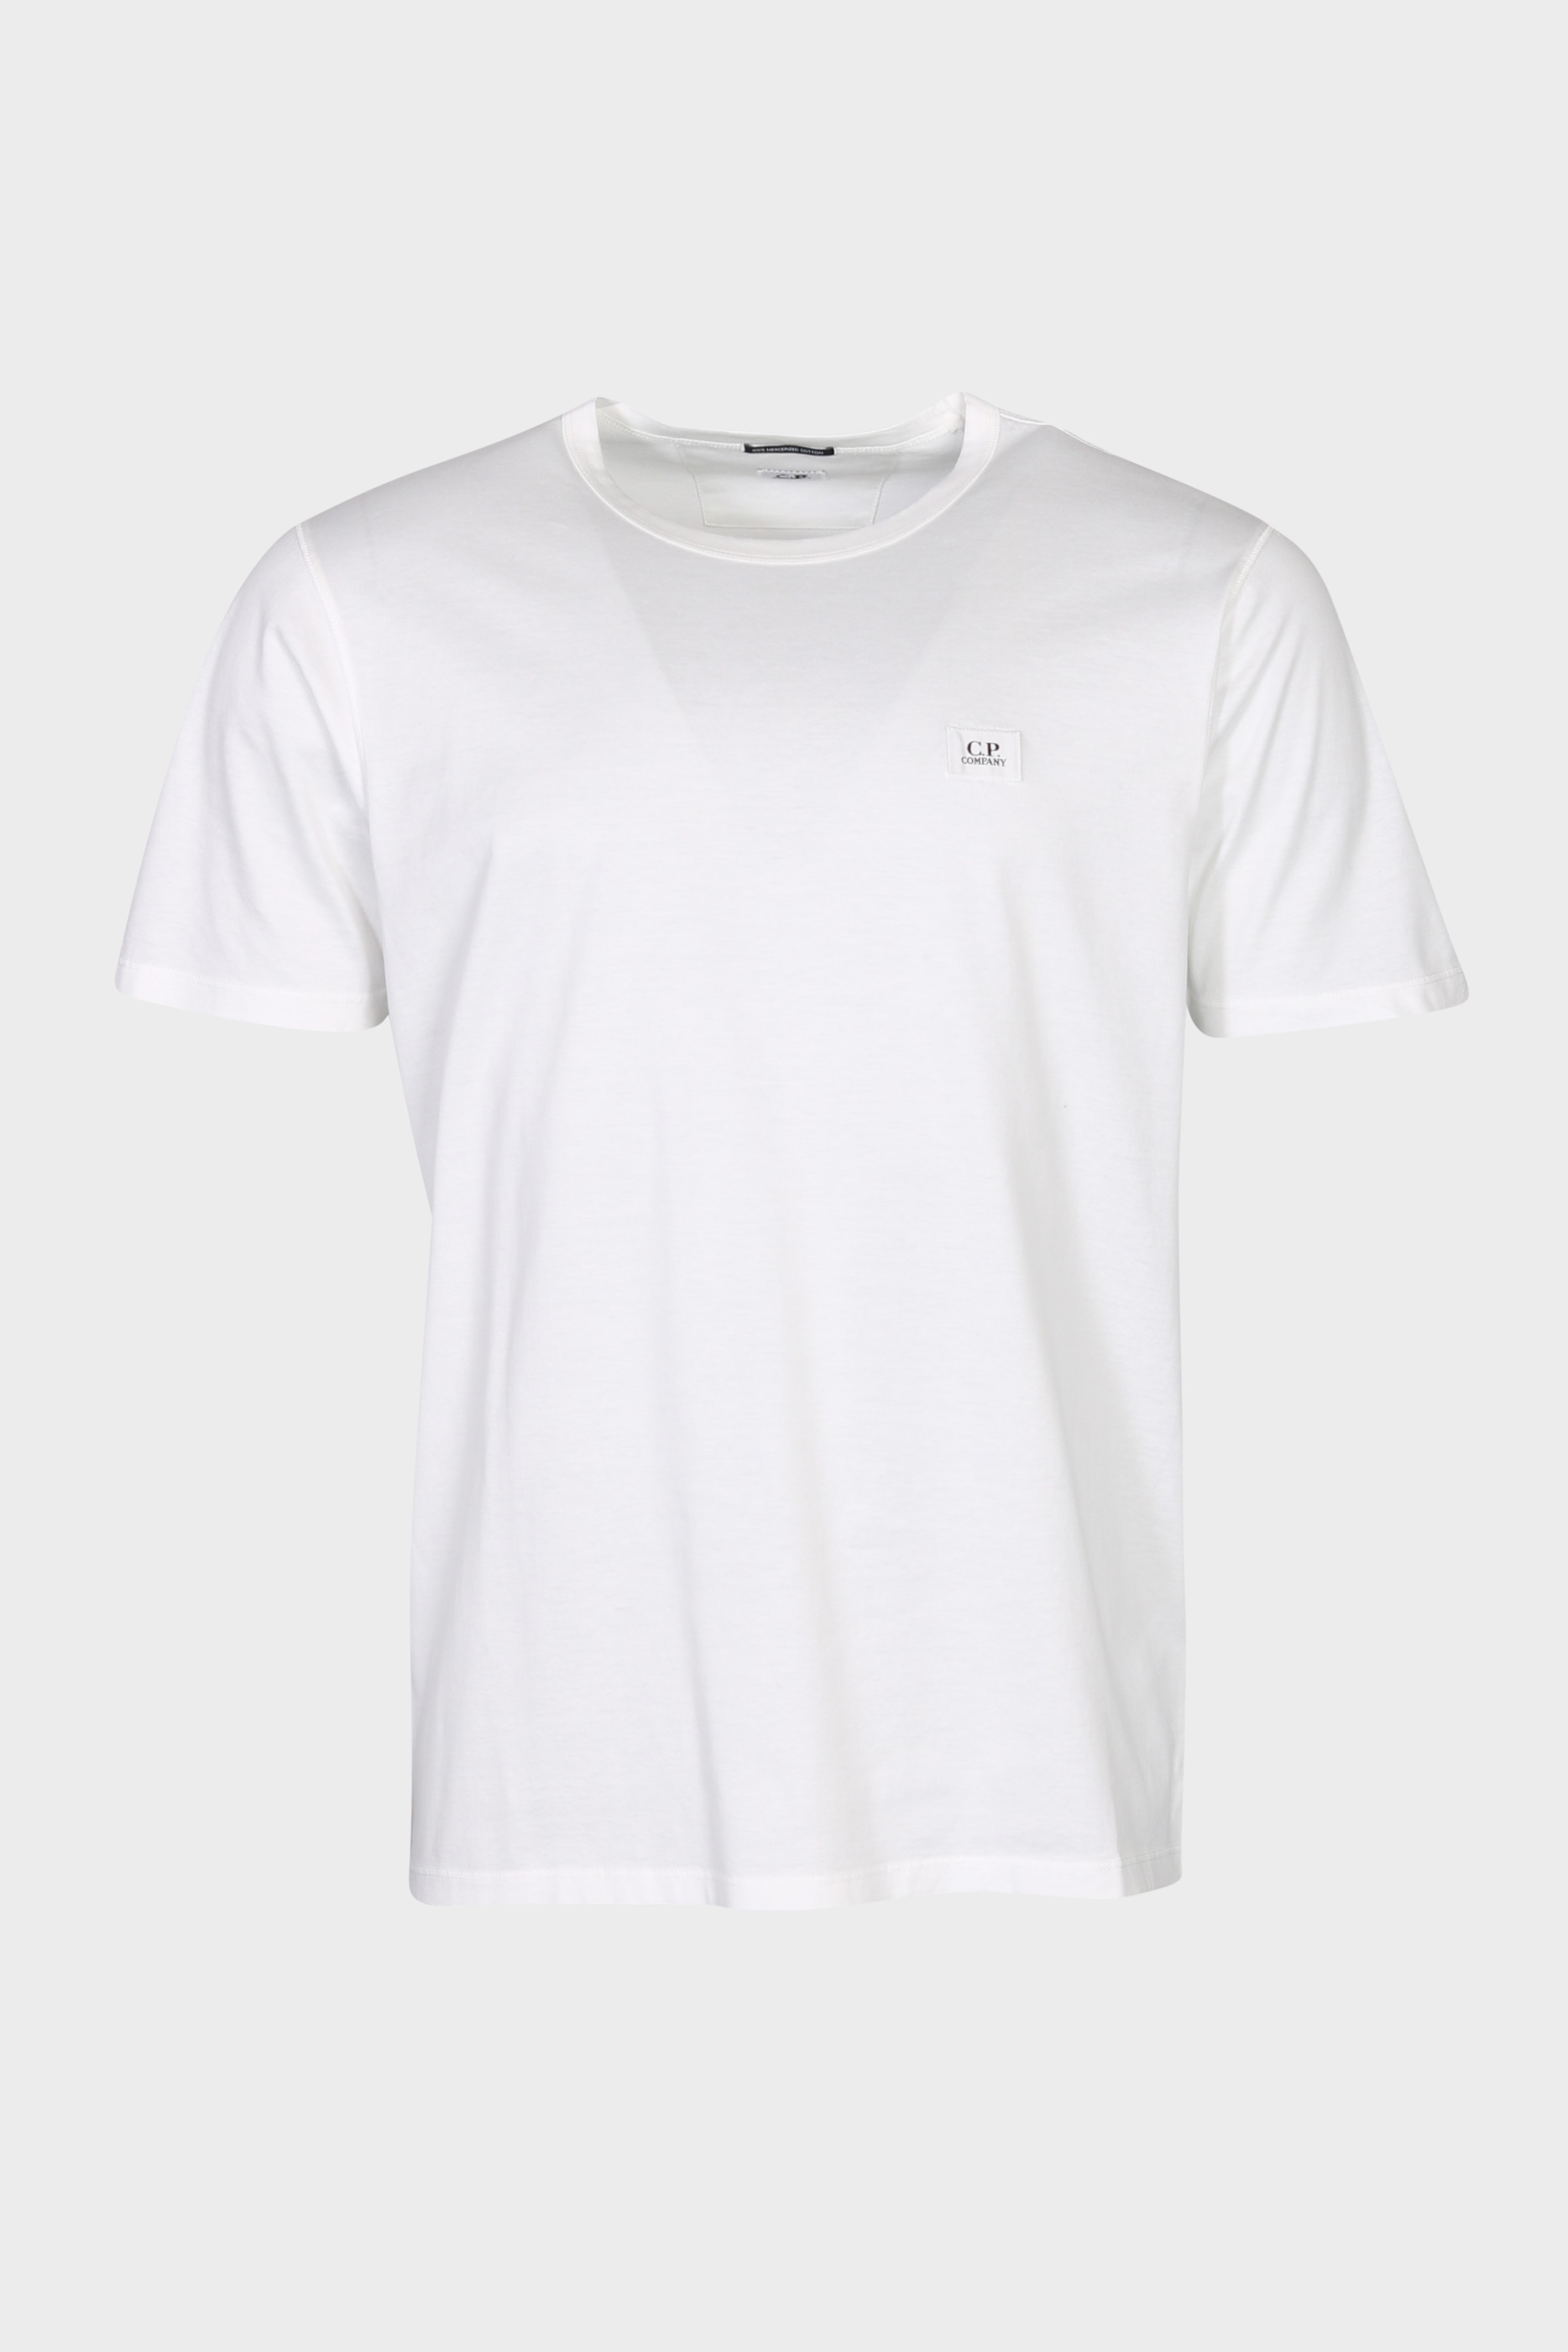 C.P. COMPANY T-Shirt in White